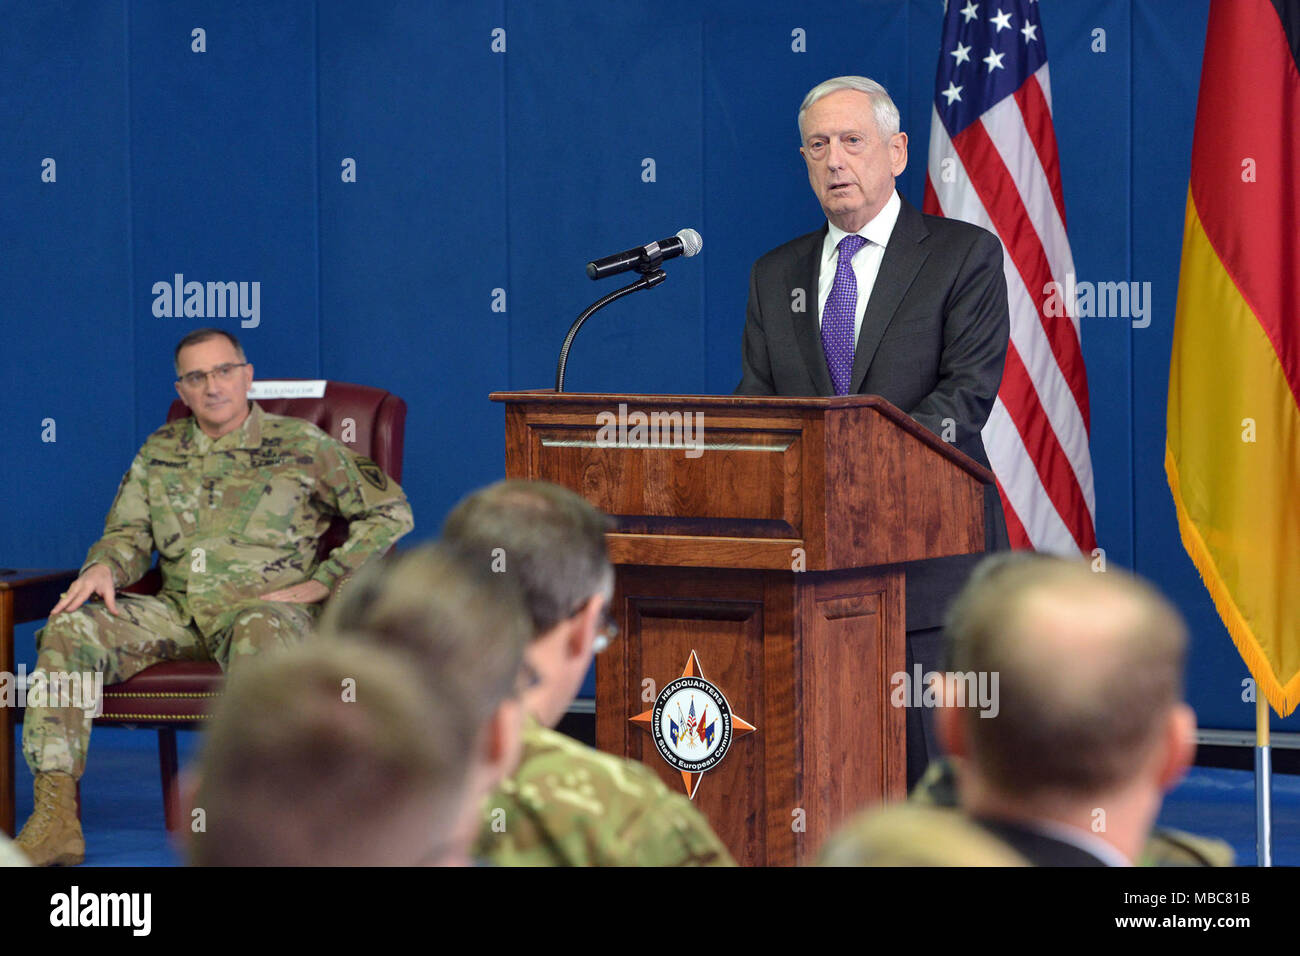 Secretary of Defense Jim Mattis led a town hall meeting with military and Civilian personnel at U.S. European Command during the Stuttgart, Germany, stop of his trip to Europe February 15, 2018. Secretary Mattis's speech and following Q&A focused on support to NATO, ready forces and the concept that 'Deterrence is Dynamic'. (U.S. Army Stock Photo